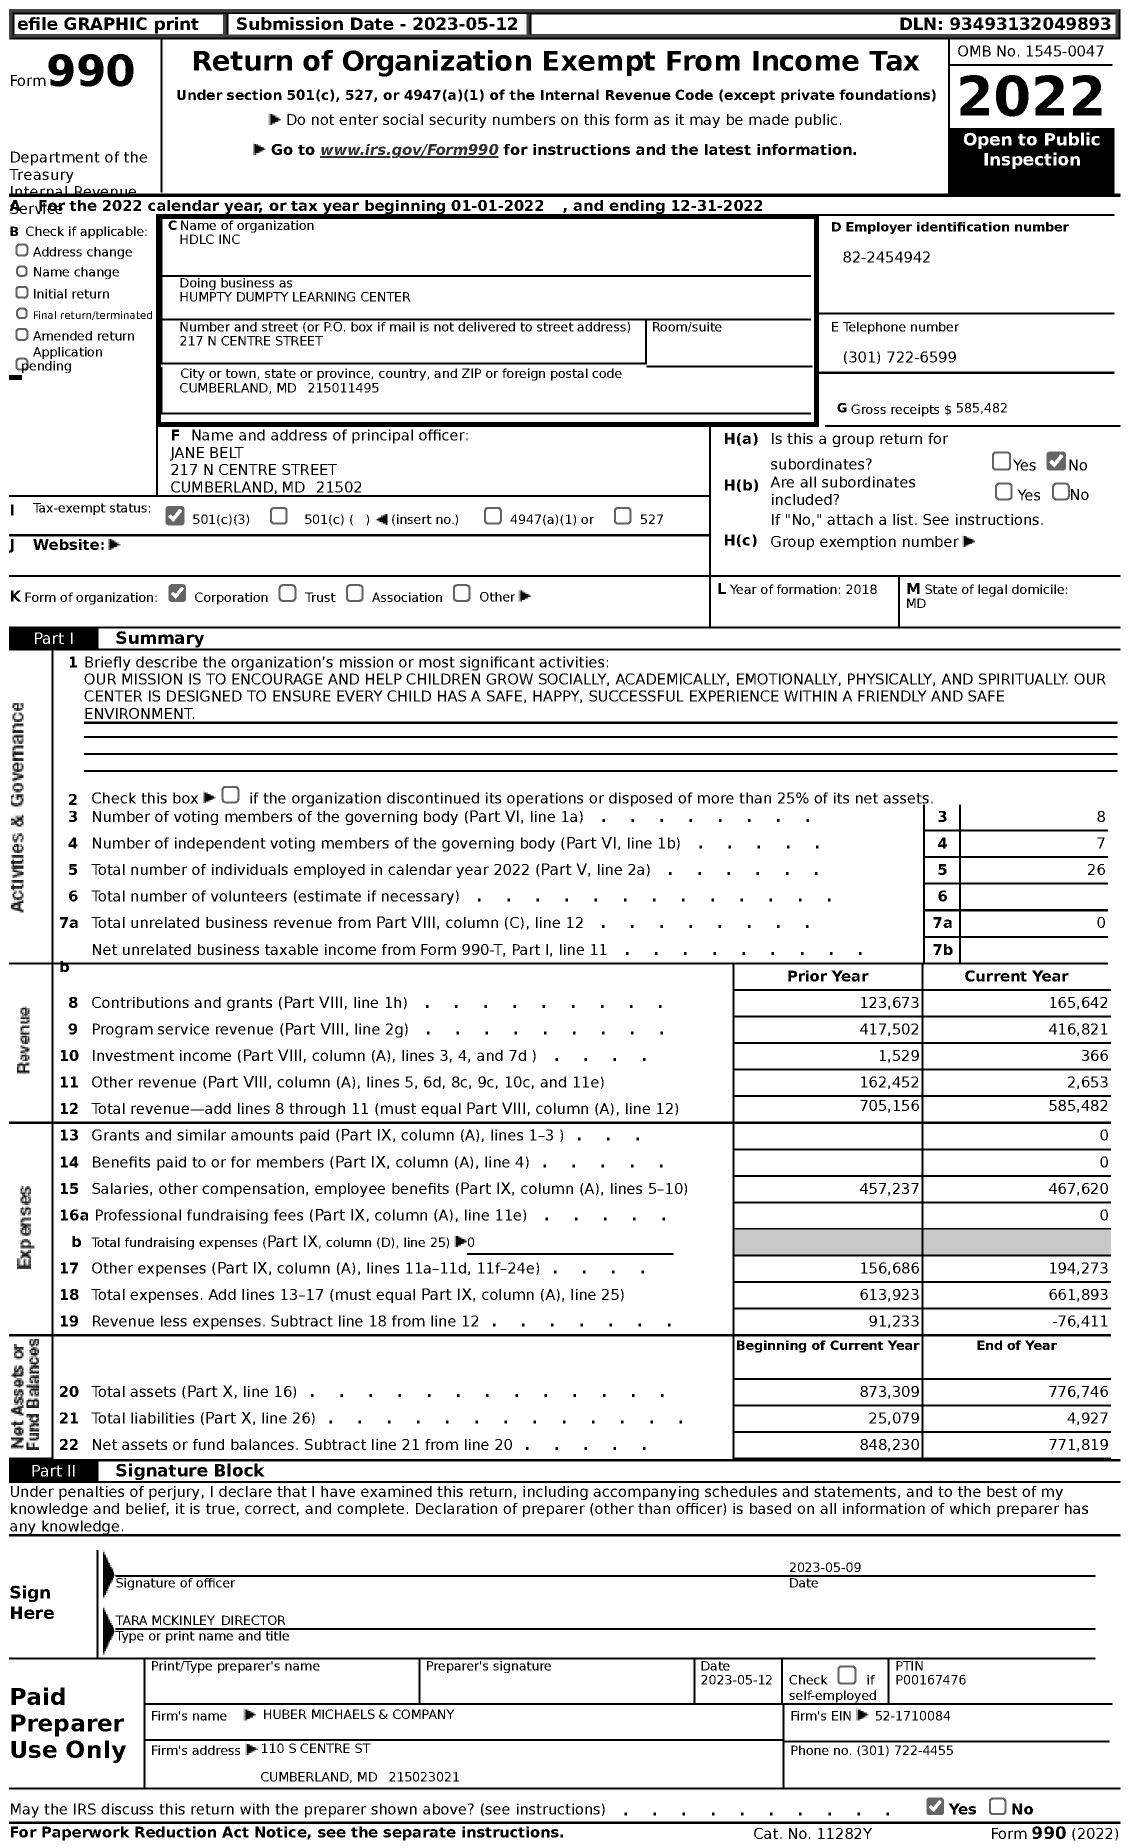 Image of first page of 2022 Form 990 for Humpty Dumpty Learning Center